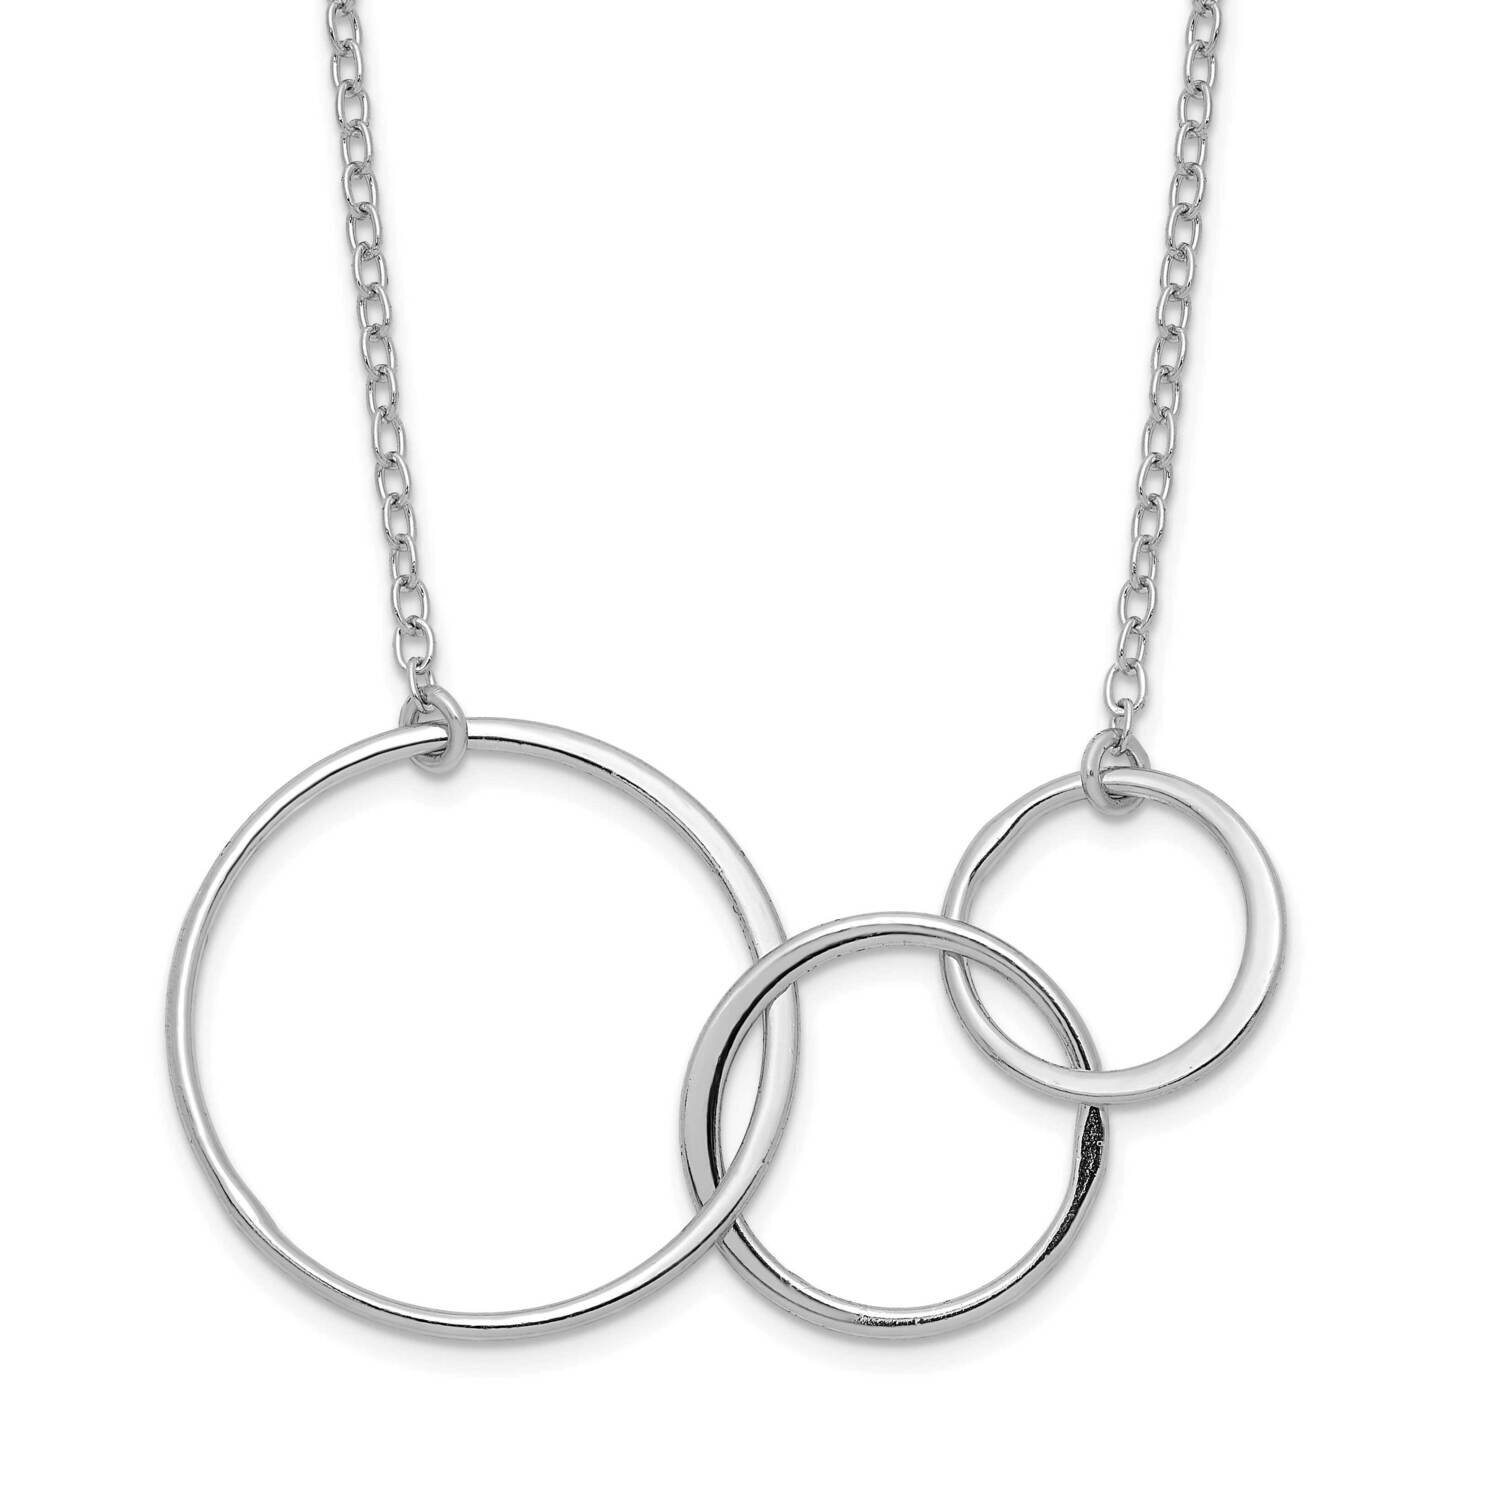 3 Intertwined Circles with 2 In Extender Necklace 16 Inch Sterling Silver Rhodium-Plated QG6097-16